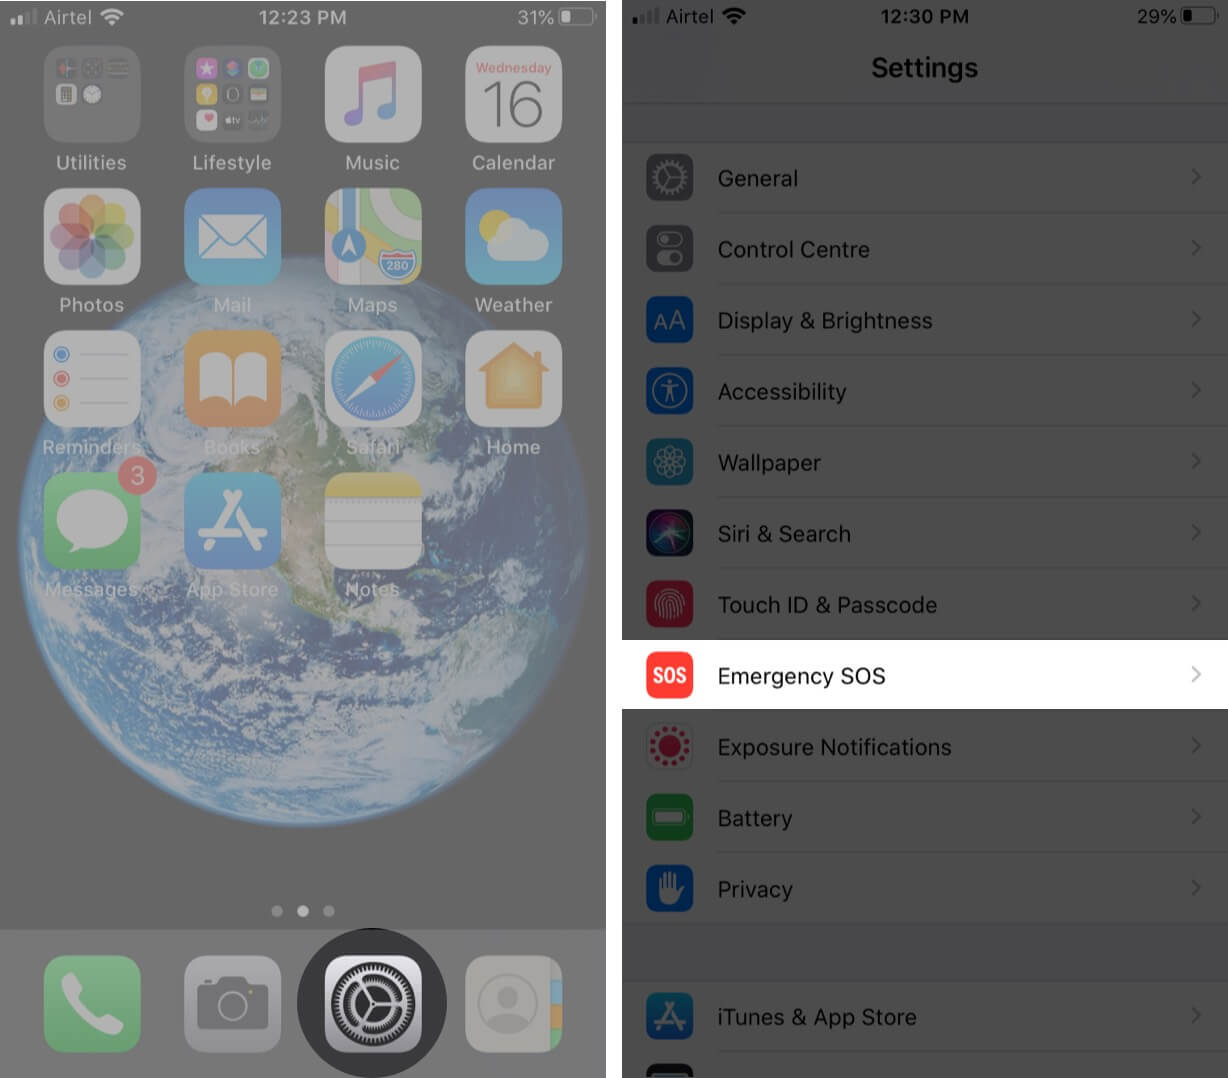 open settings and tap on emergency sos on iphone